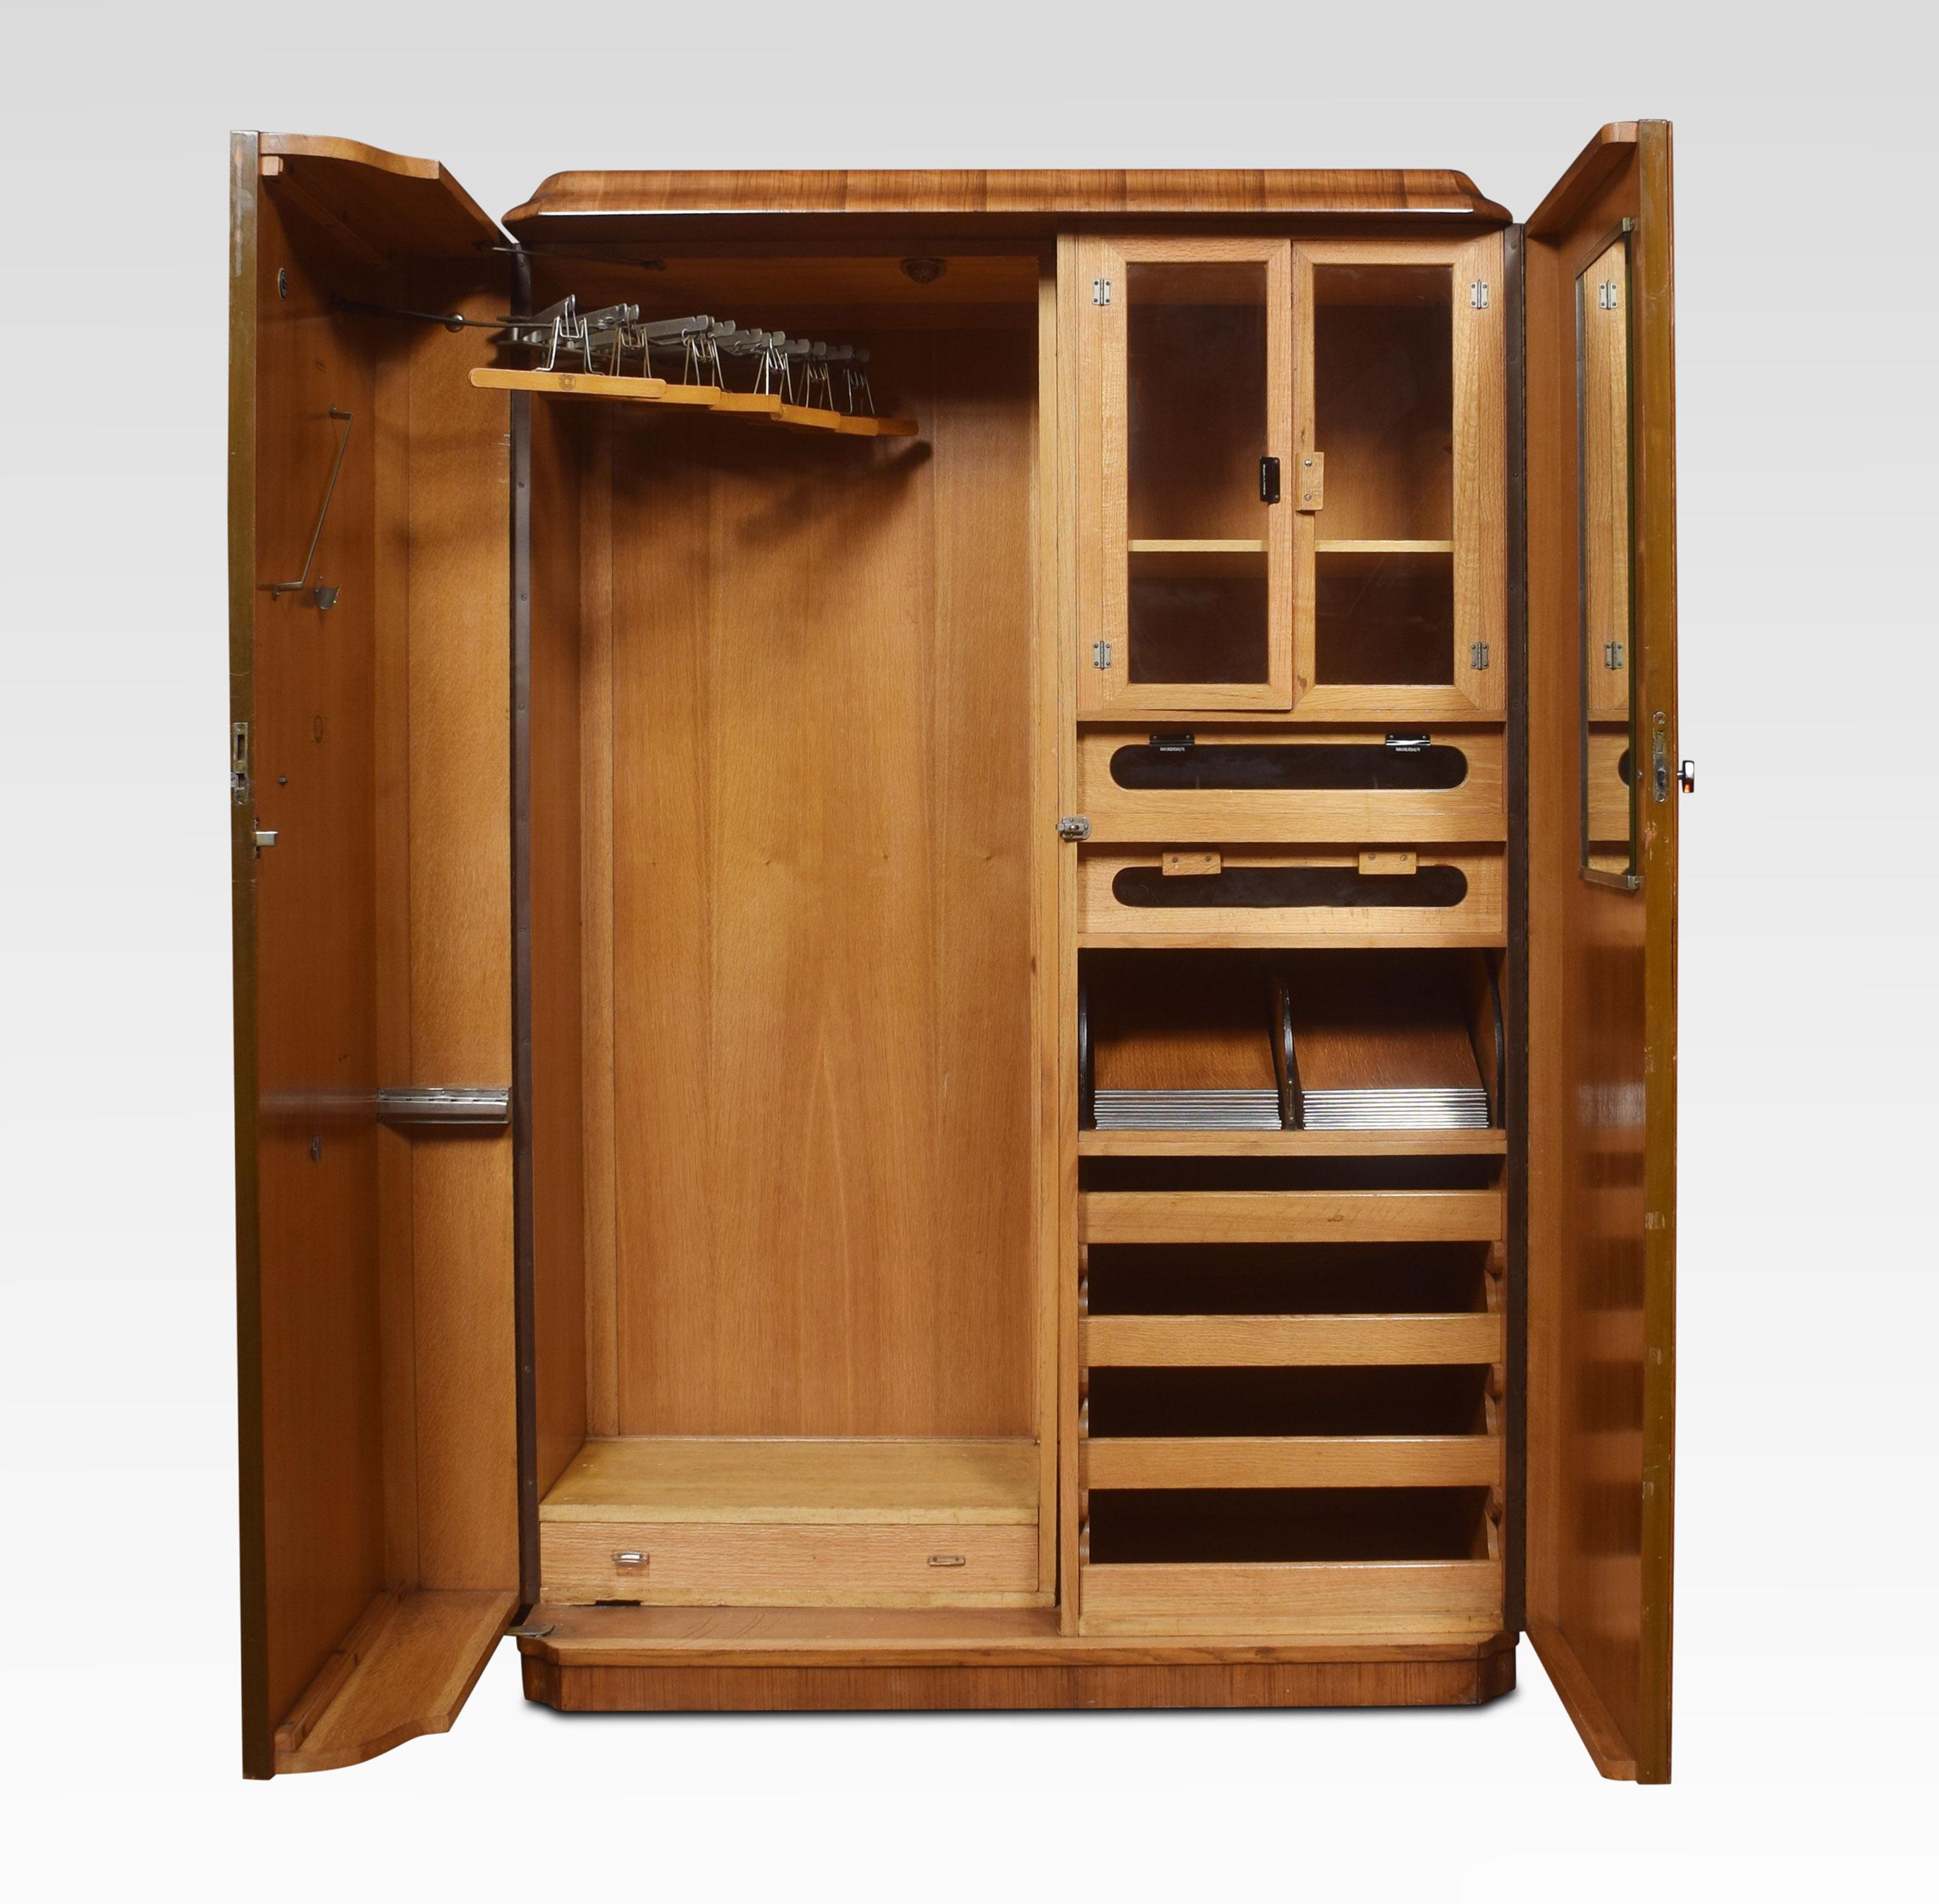 Walnut Art Deco compactum wardrobe, the moulded cornice above two large doors with Bakelite handles, opening to reveal fitted glazed compartments, drawers and hanging space. All raised up on a plinth base.
Dimensions:
Height 75.5 inches
Width 50